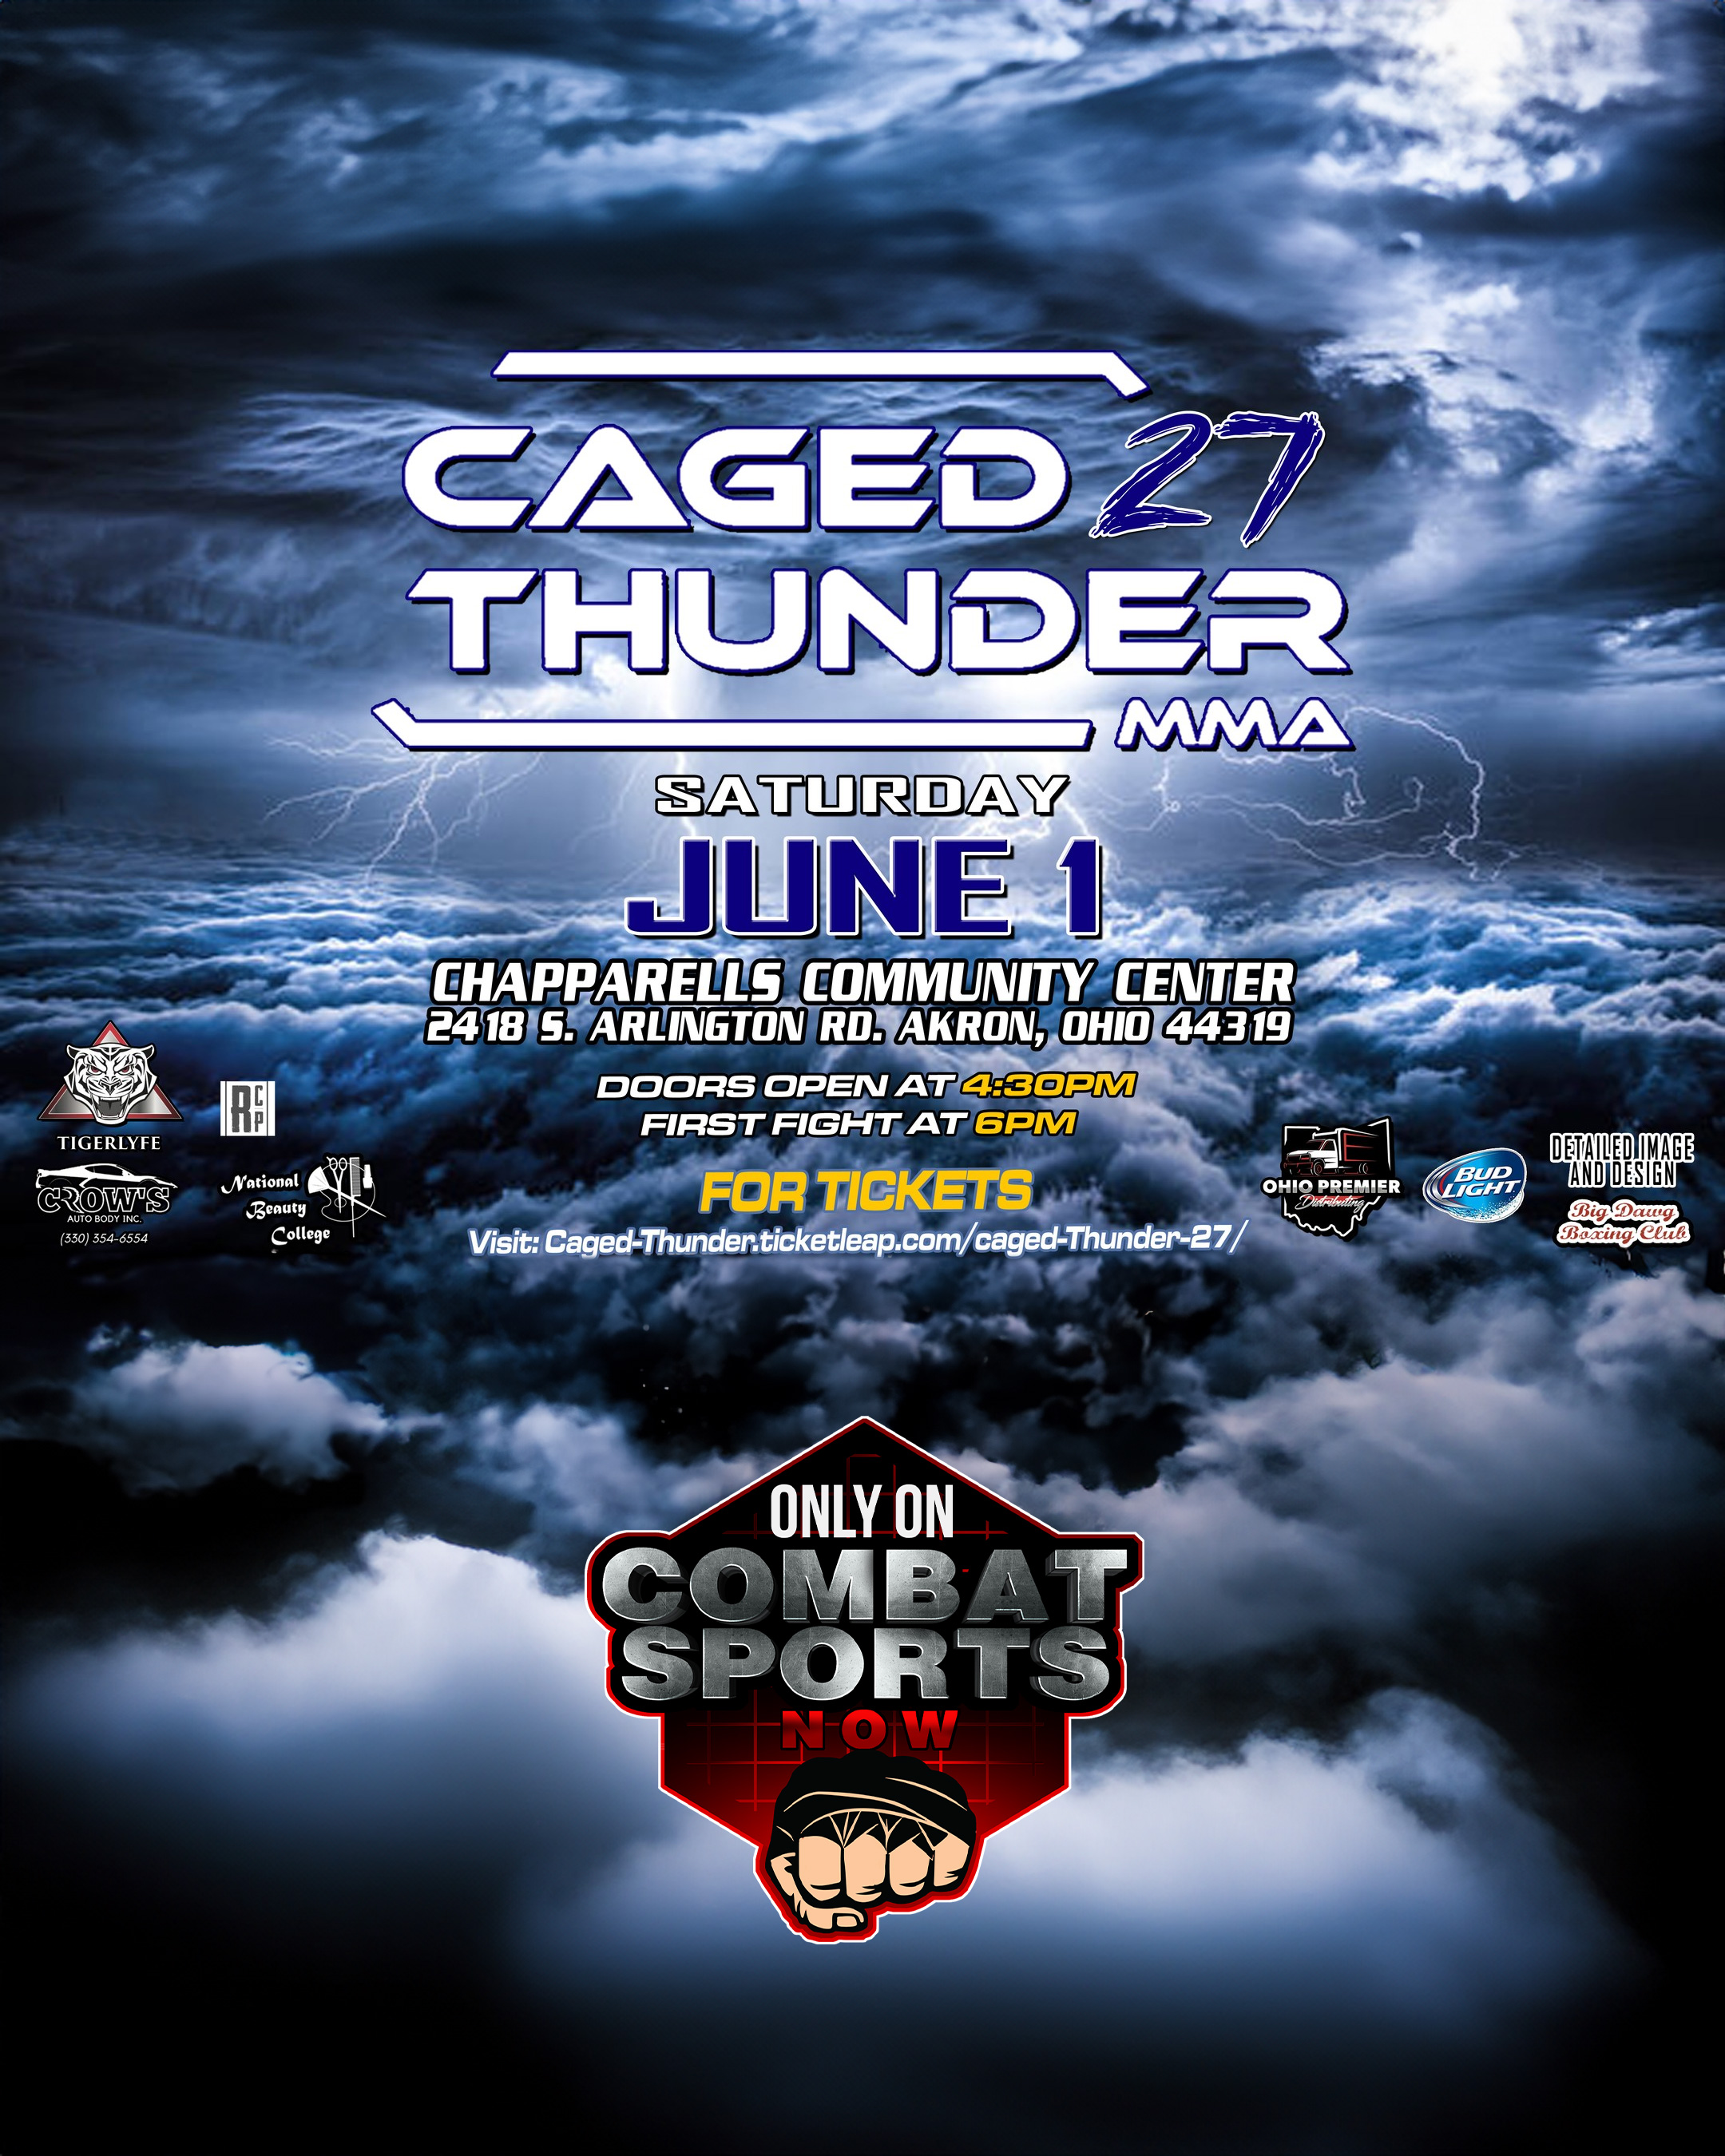 Watch Caged Thunder 27 on Combat Sports Now